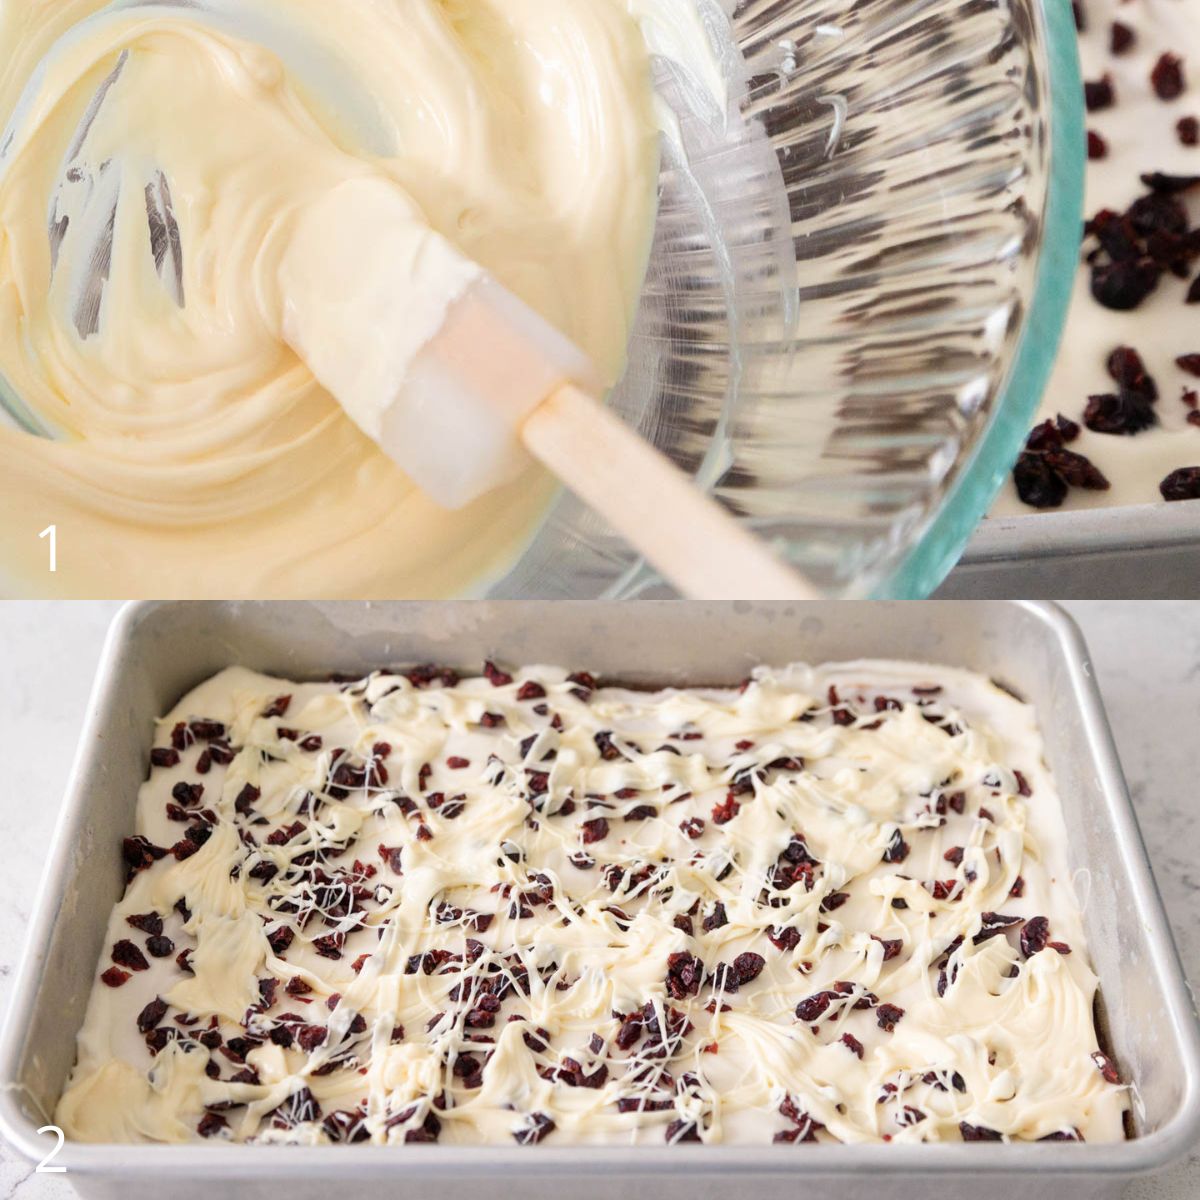 The photo collage shows a picture of the melted chocolate in a mixing bowl next to the pan of cranberry bliss bars drizzled with the white chocolate over the top.